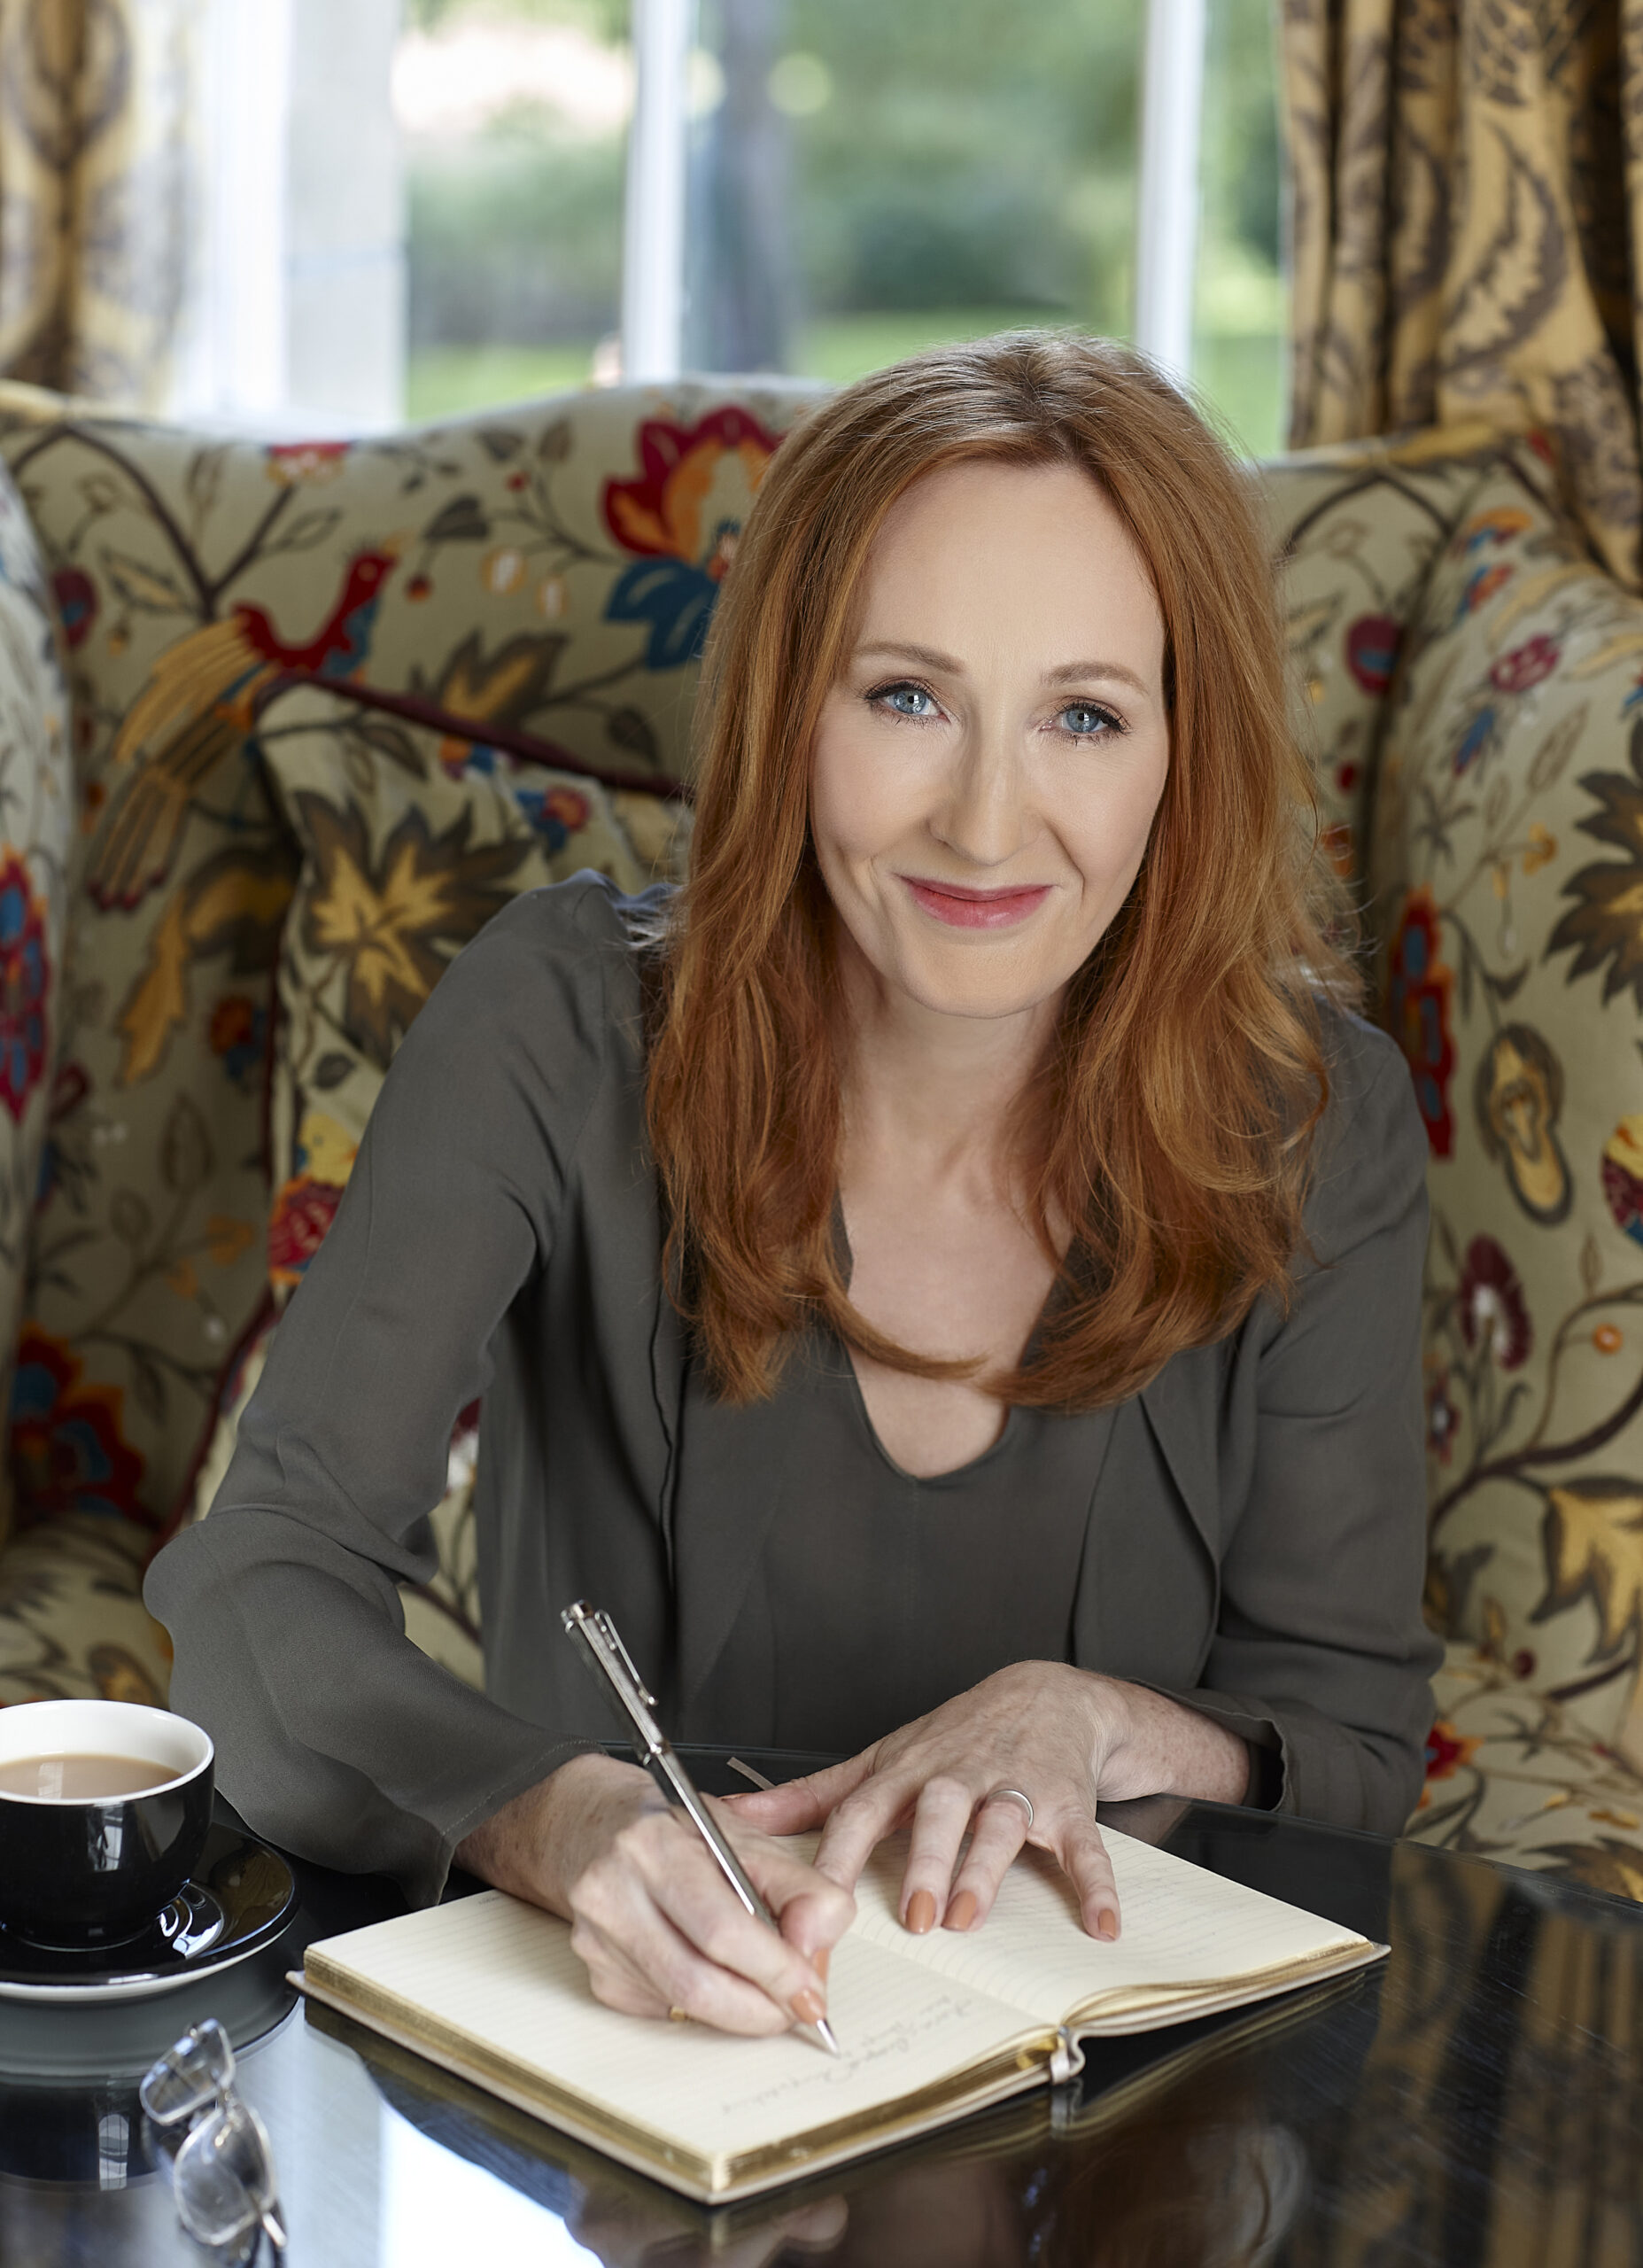 Lethal White review: J.K. Rowling's latest Robert Galbraith book is a blast  - Vox